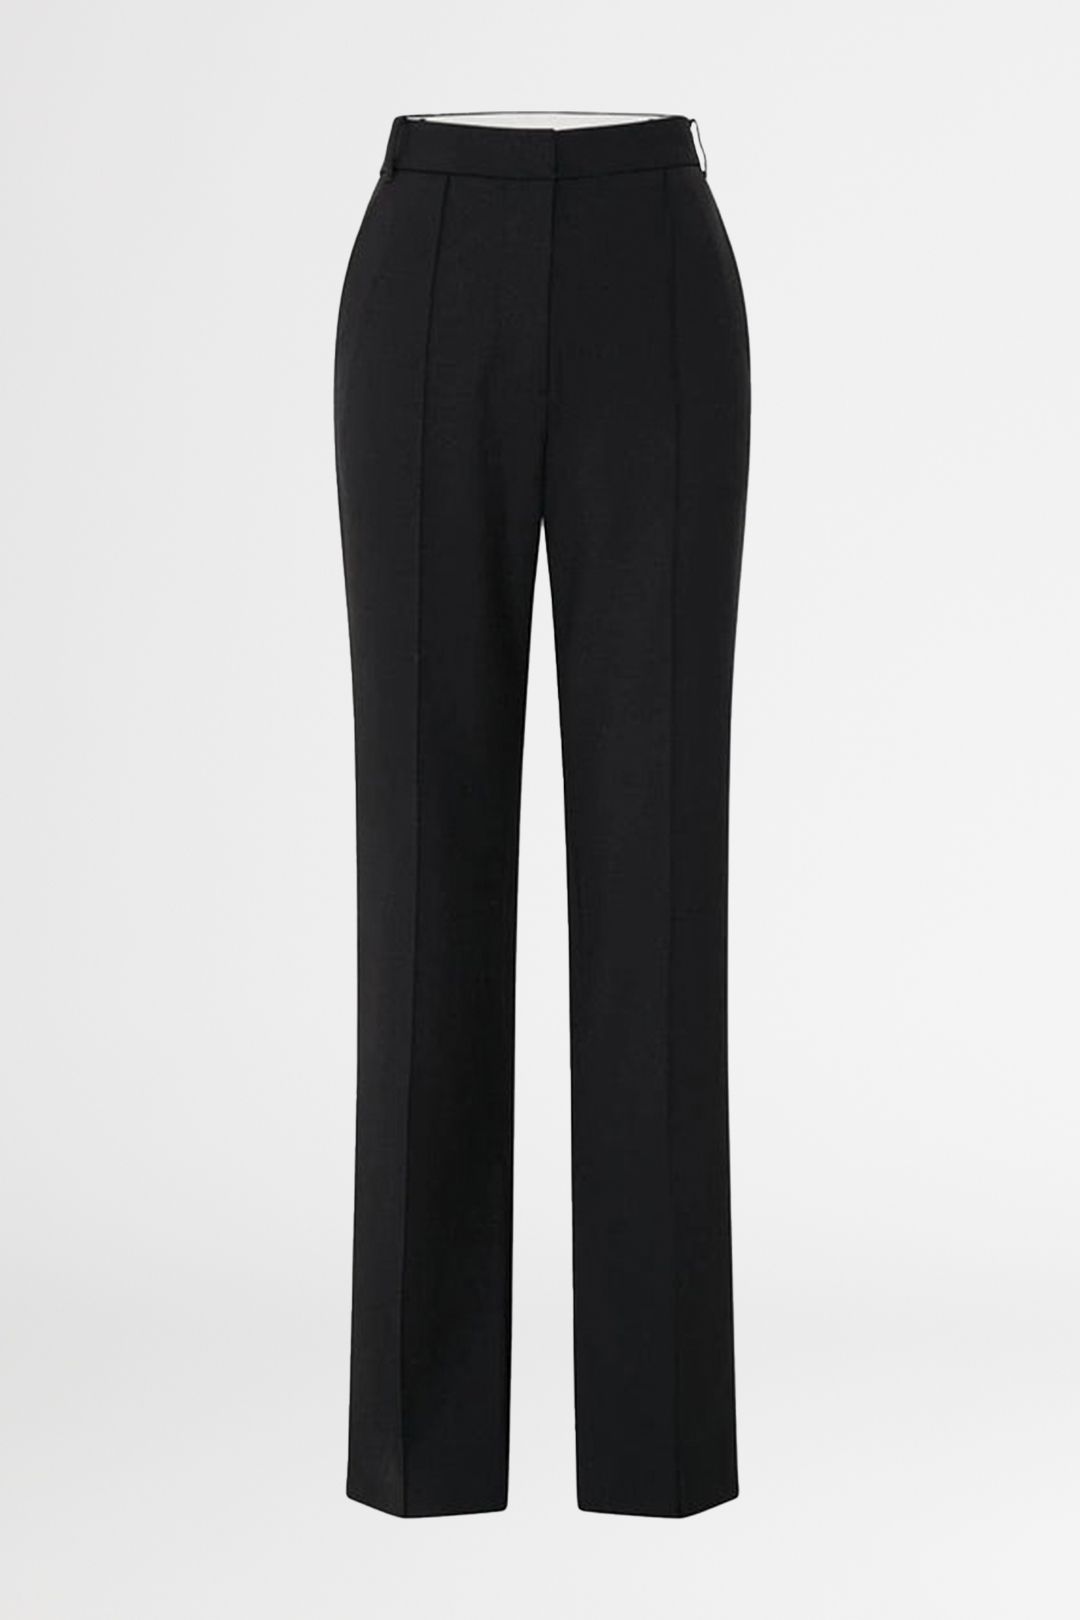 Camilla and Marc Lennox Tailored Pant Black